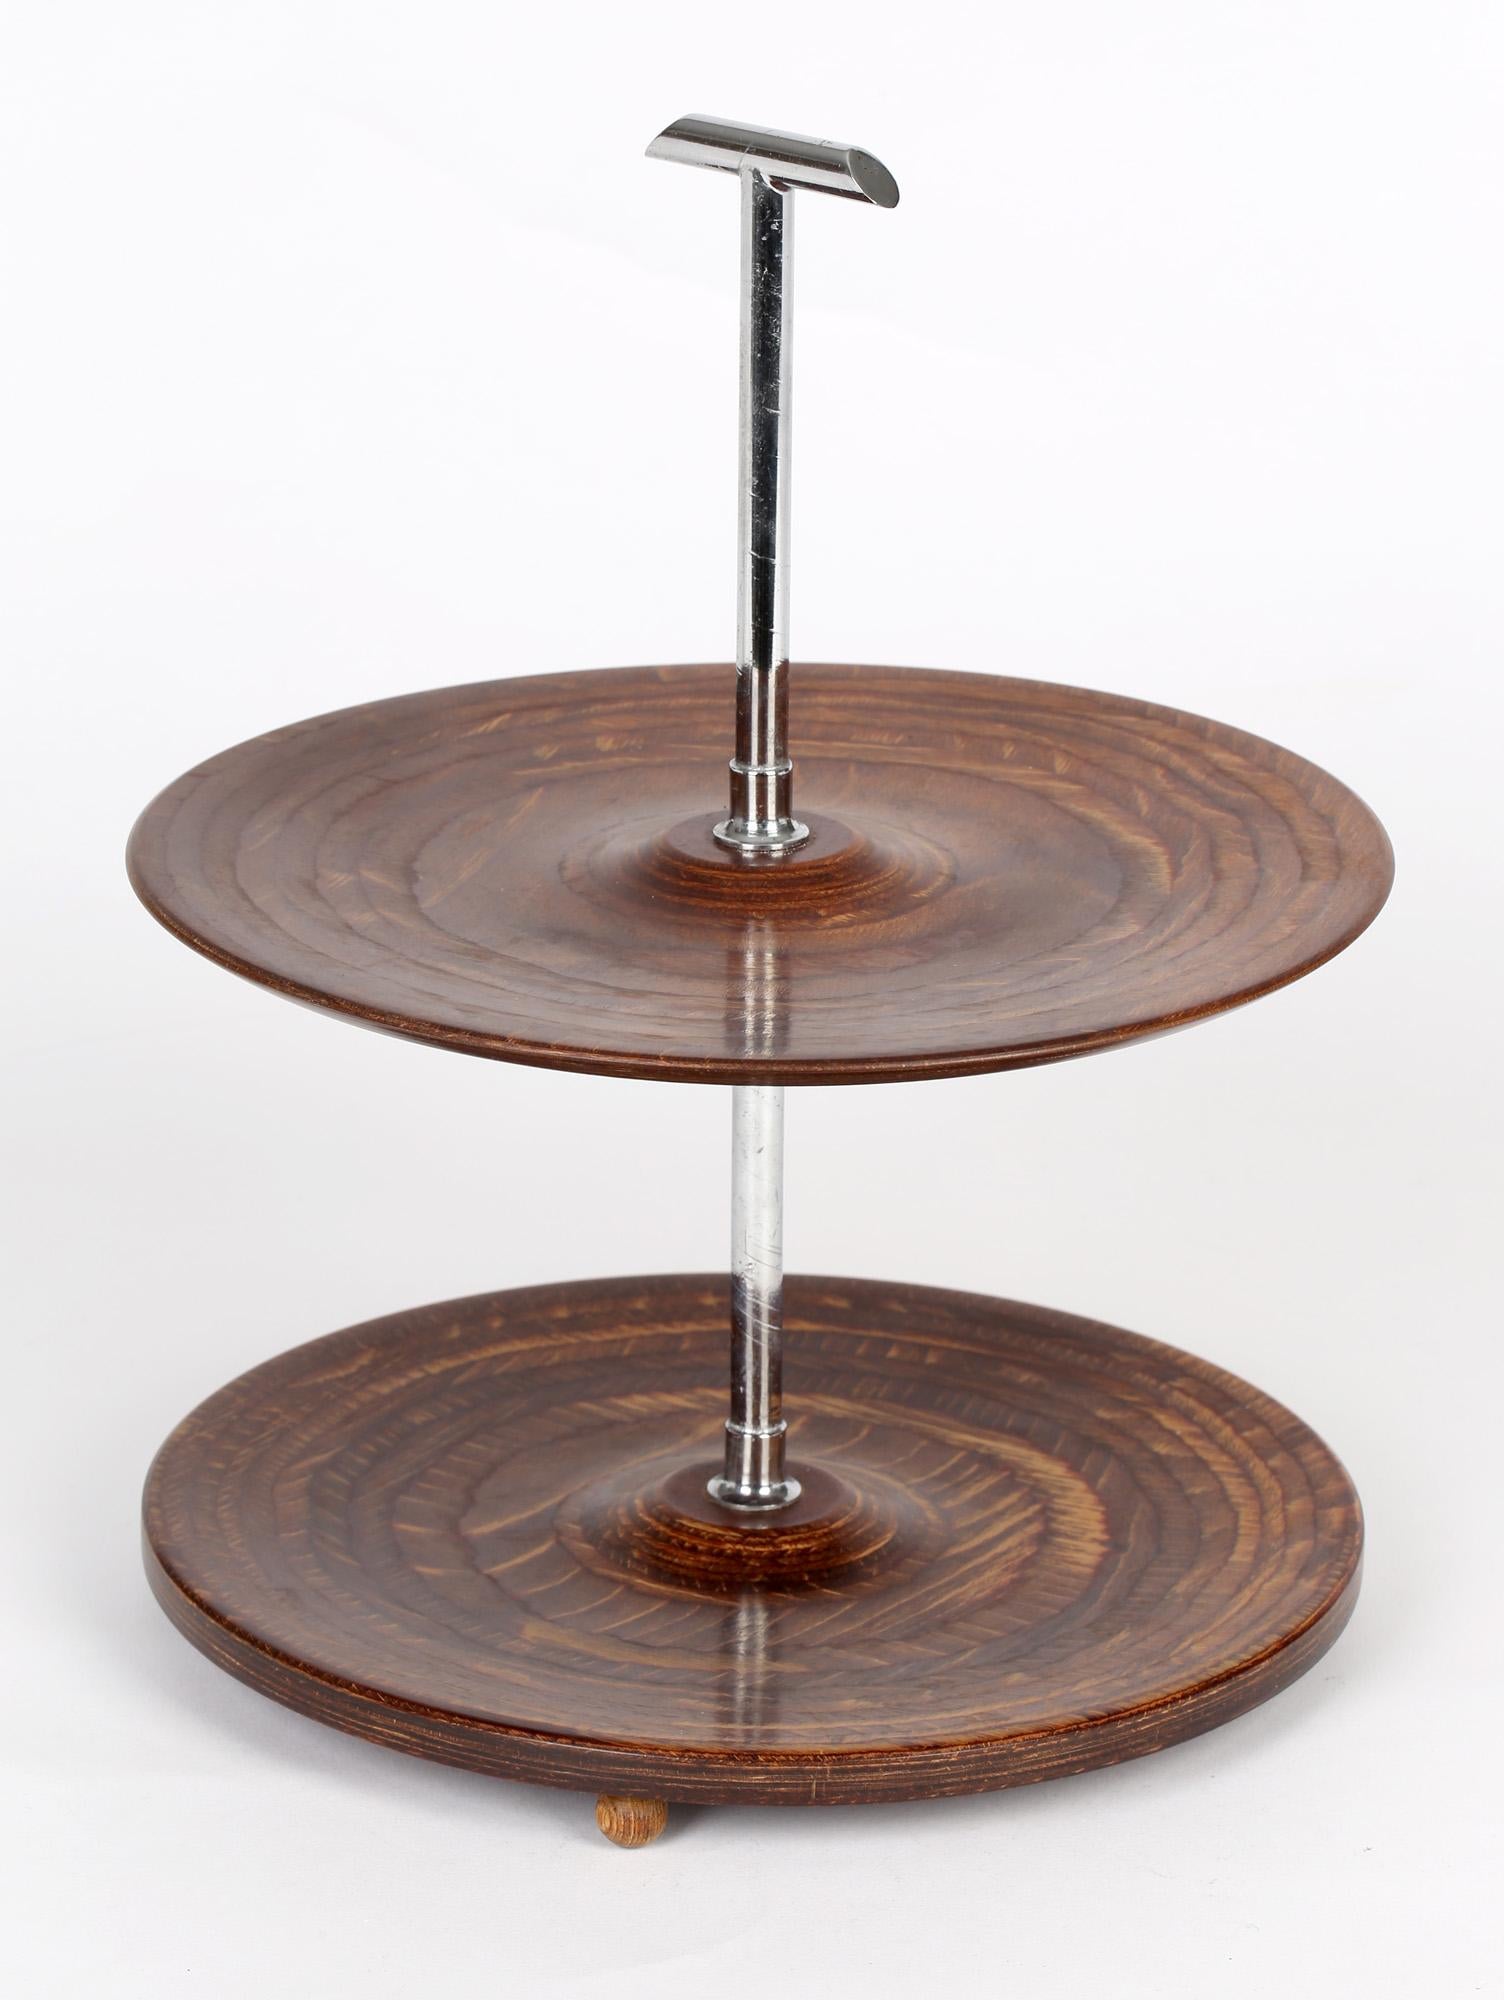 20th Century Mid-Century Two Tier Walnut and Chrome Cake Stand For Sale